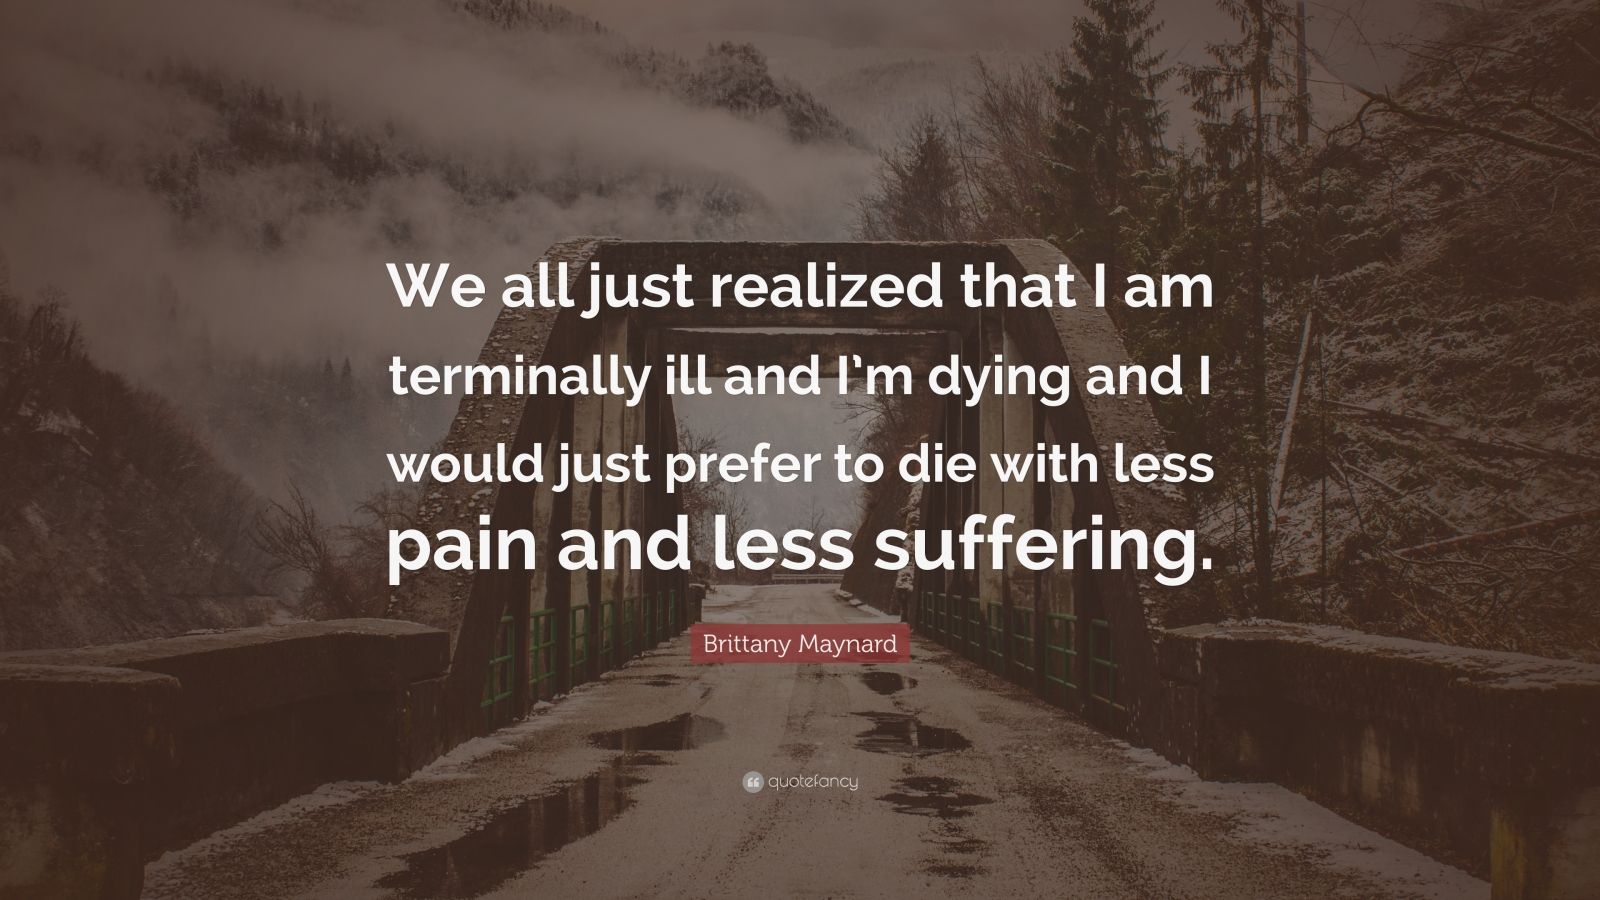 inspirational quotes for those with terminal illness